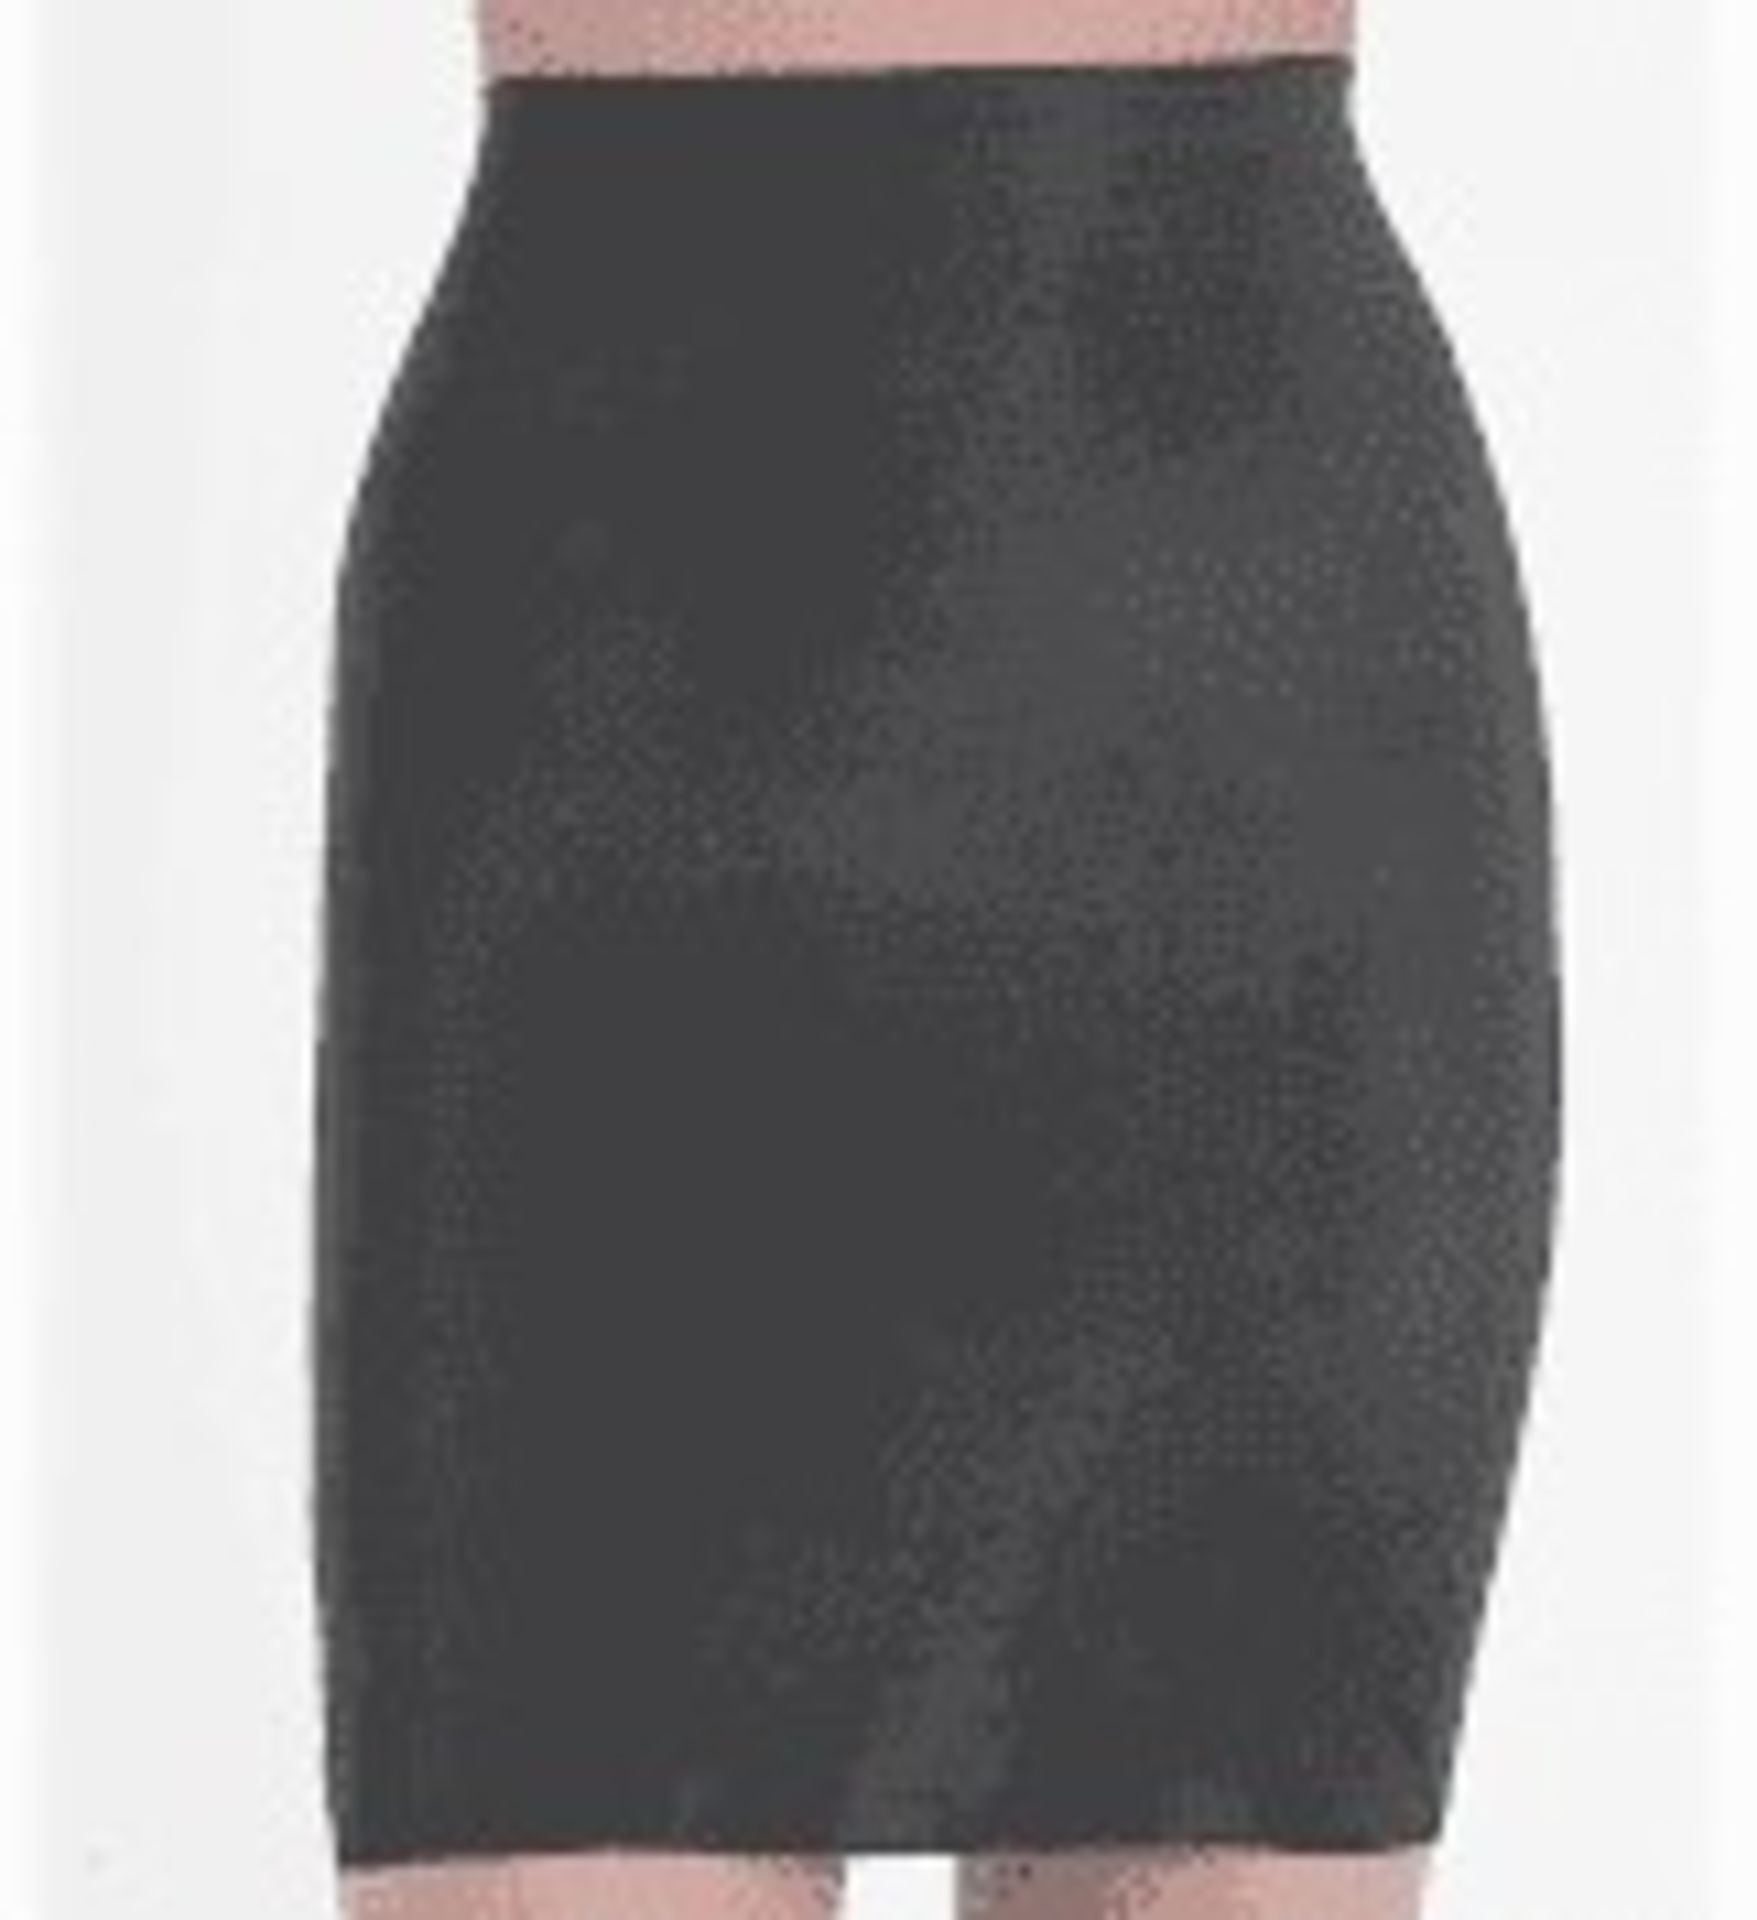 1 LOT TO CONTAIN 5 SPANX SKIRTS IN BOLD BLACK / SIZE 12 / STYLE 1899 / RRP £440.00 (PUBLIC VIEWING